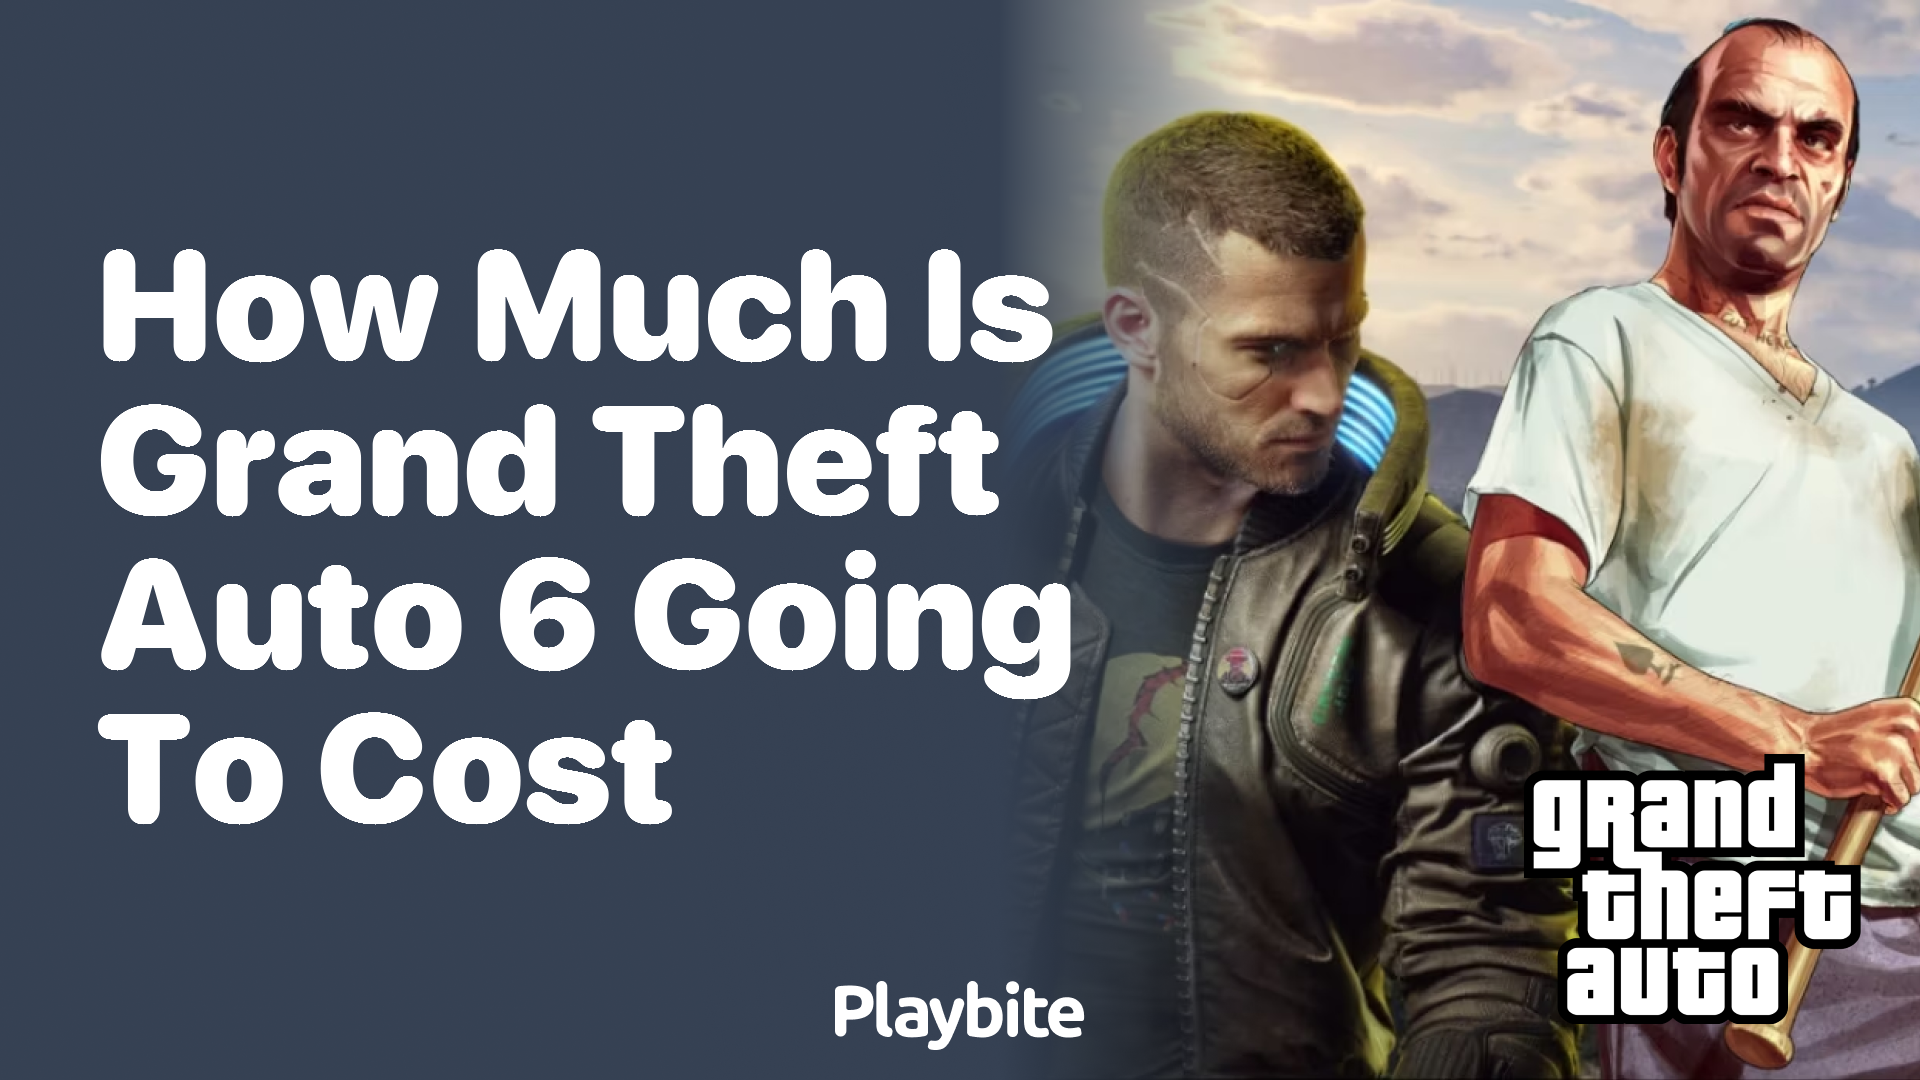 How Much is Grand Theft Auto 6 Going to Cost?